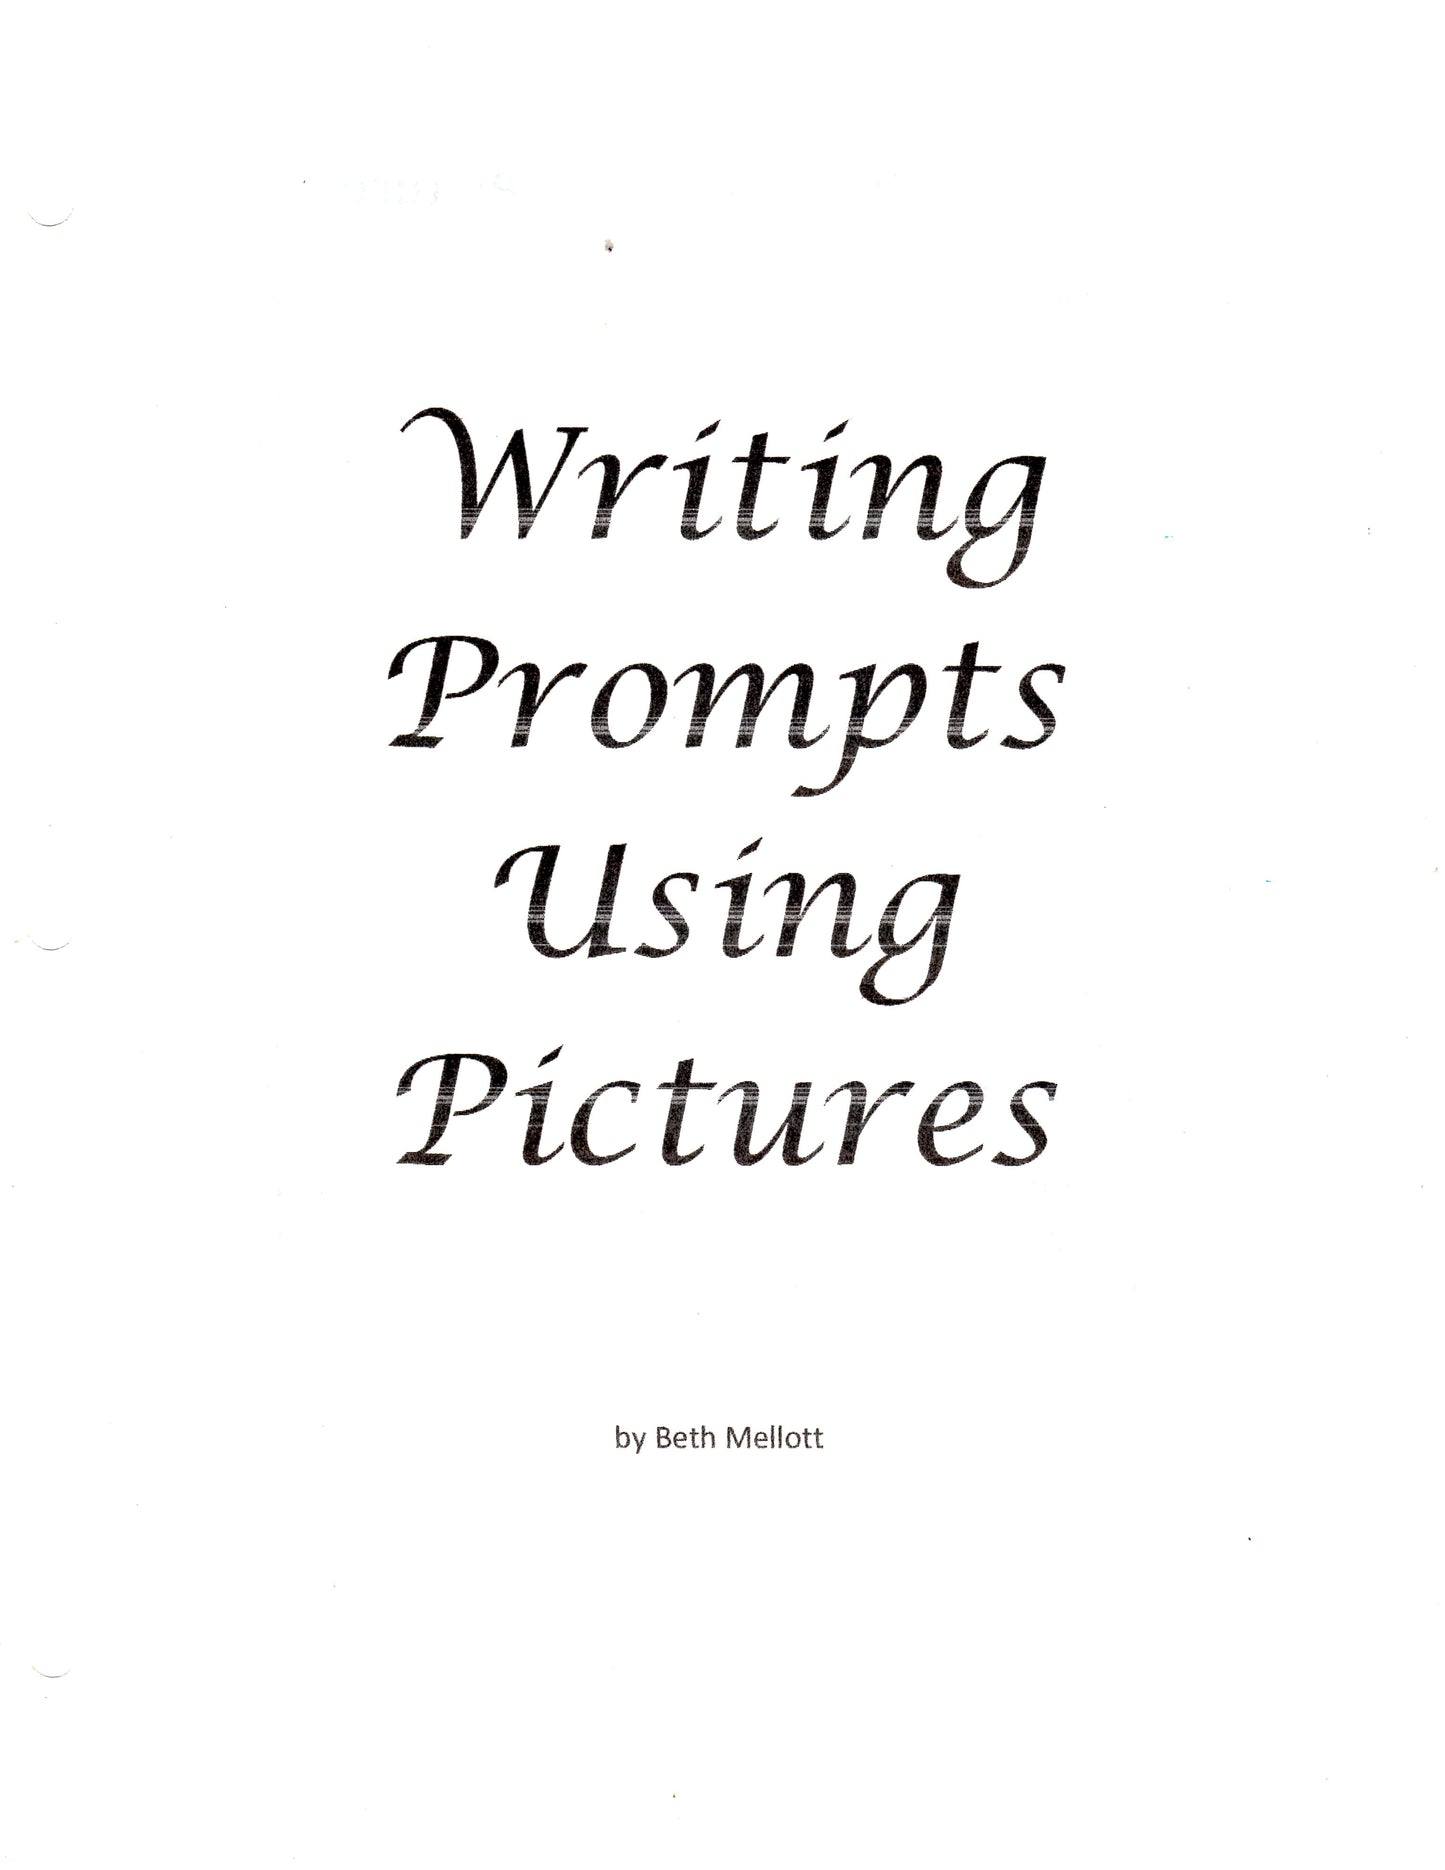 Writing Prompts Using Pictures 45-Page Book